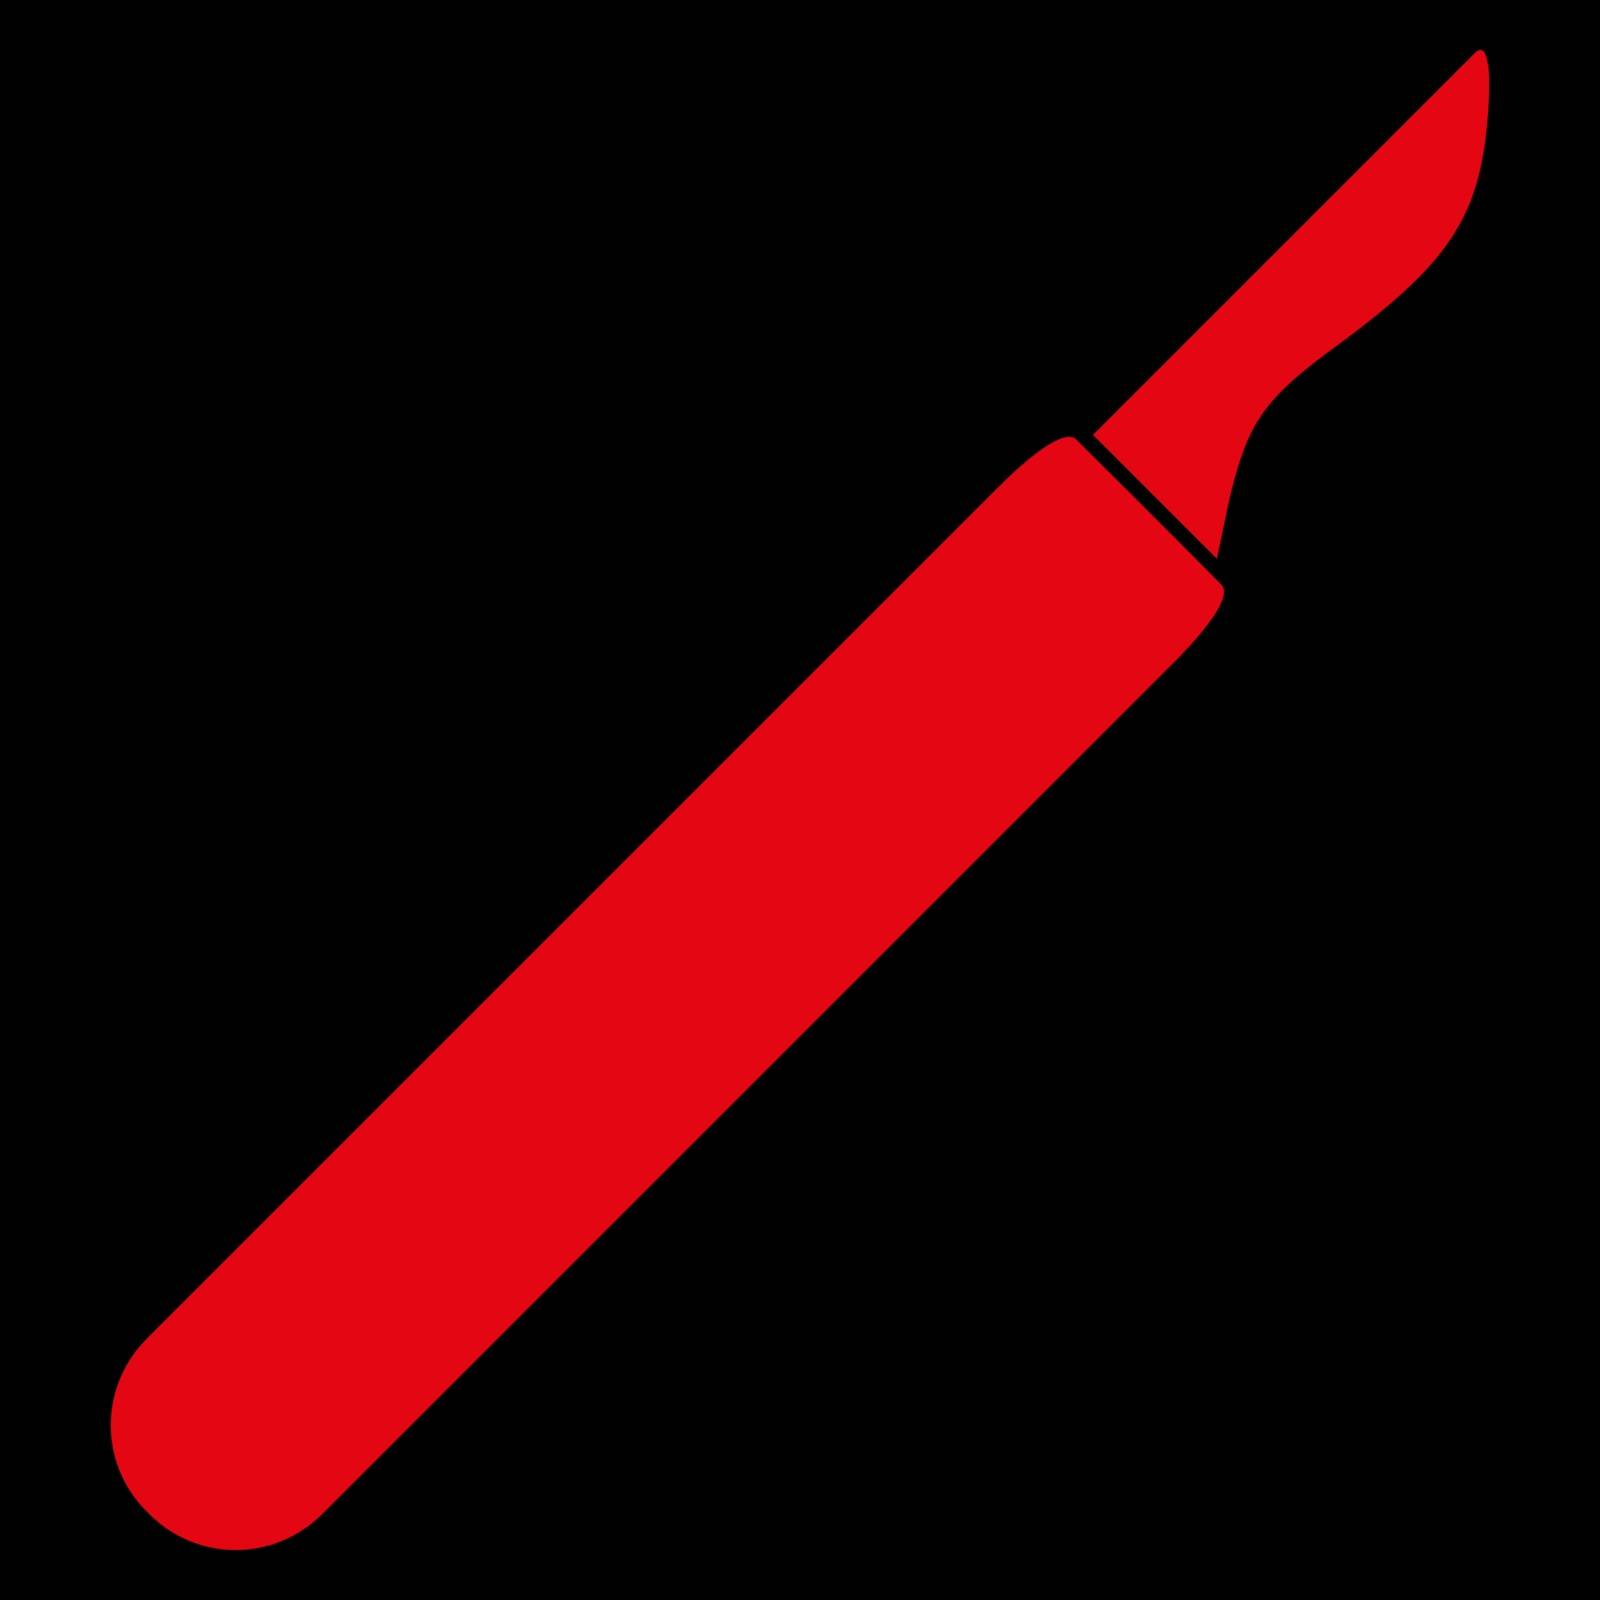 Scalpel vector icon. Style is flat symbol, red color, rounded angles, black background.